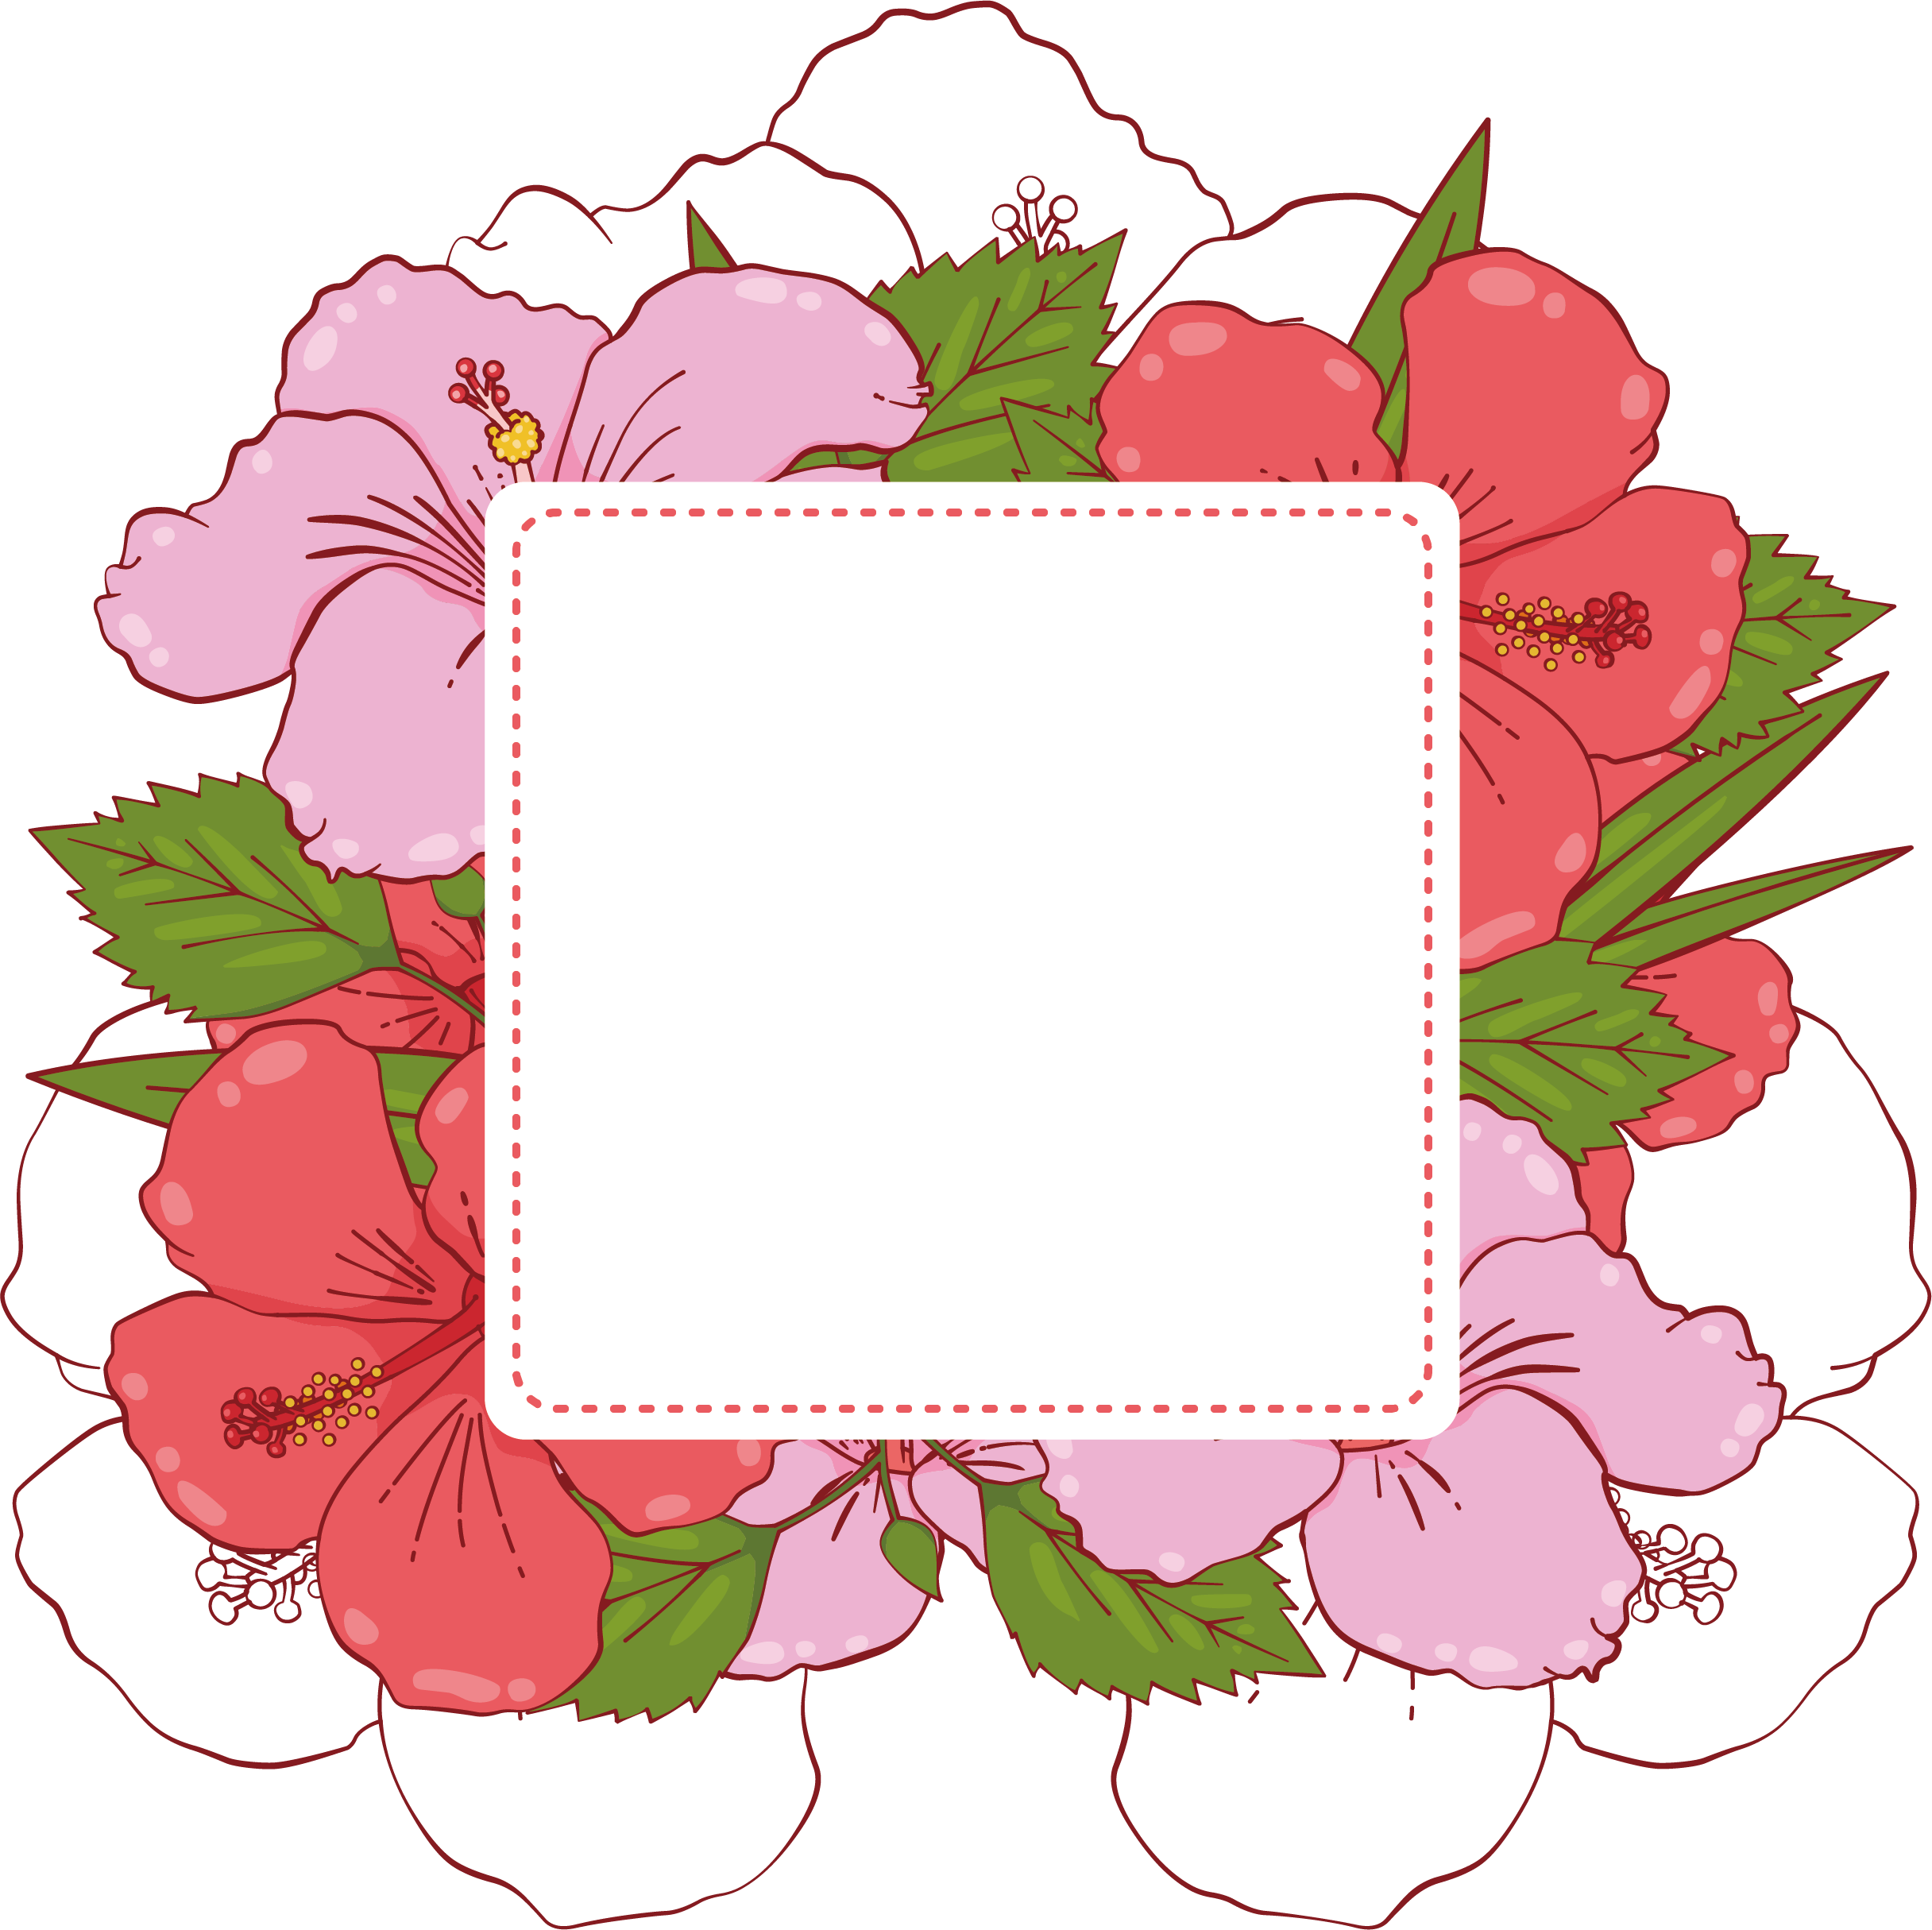 A Square Frame Of Flowers